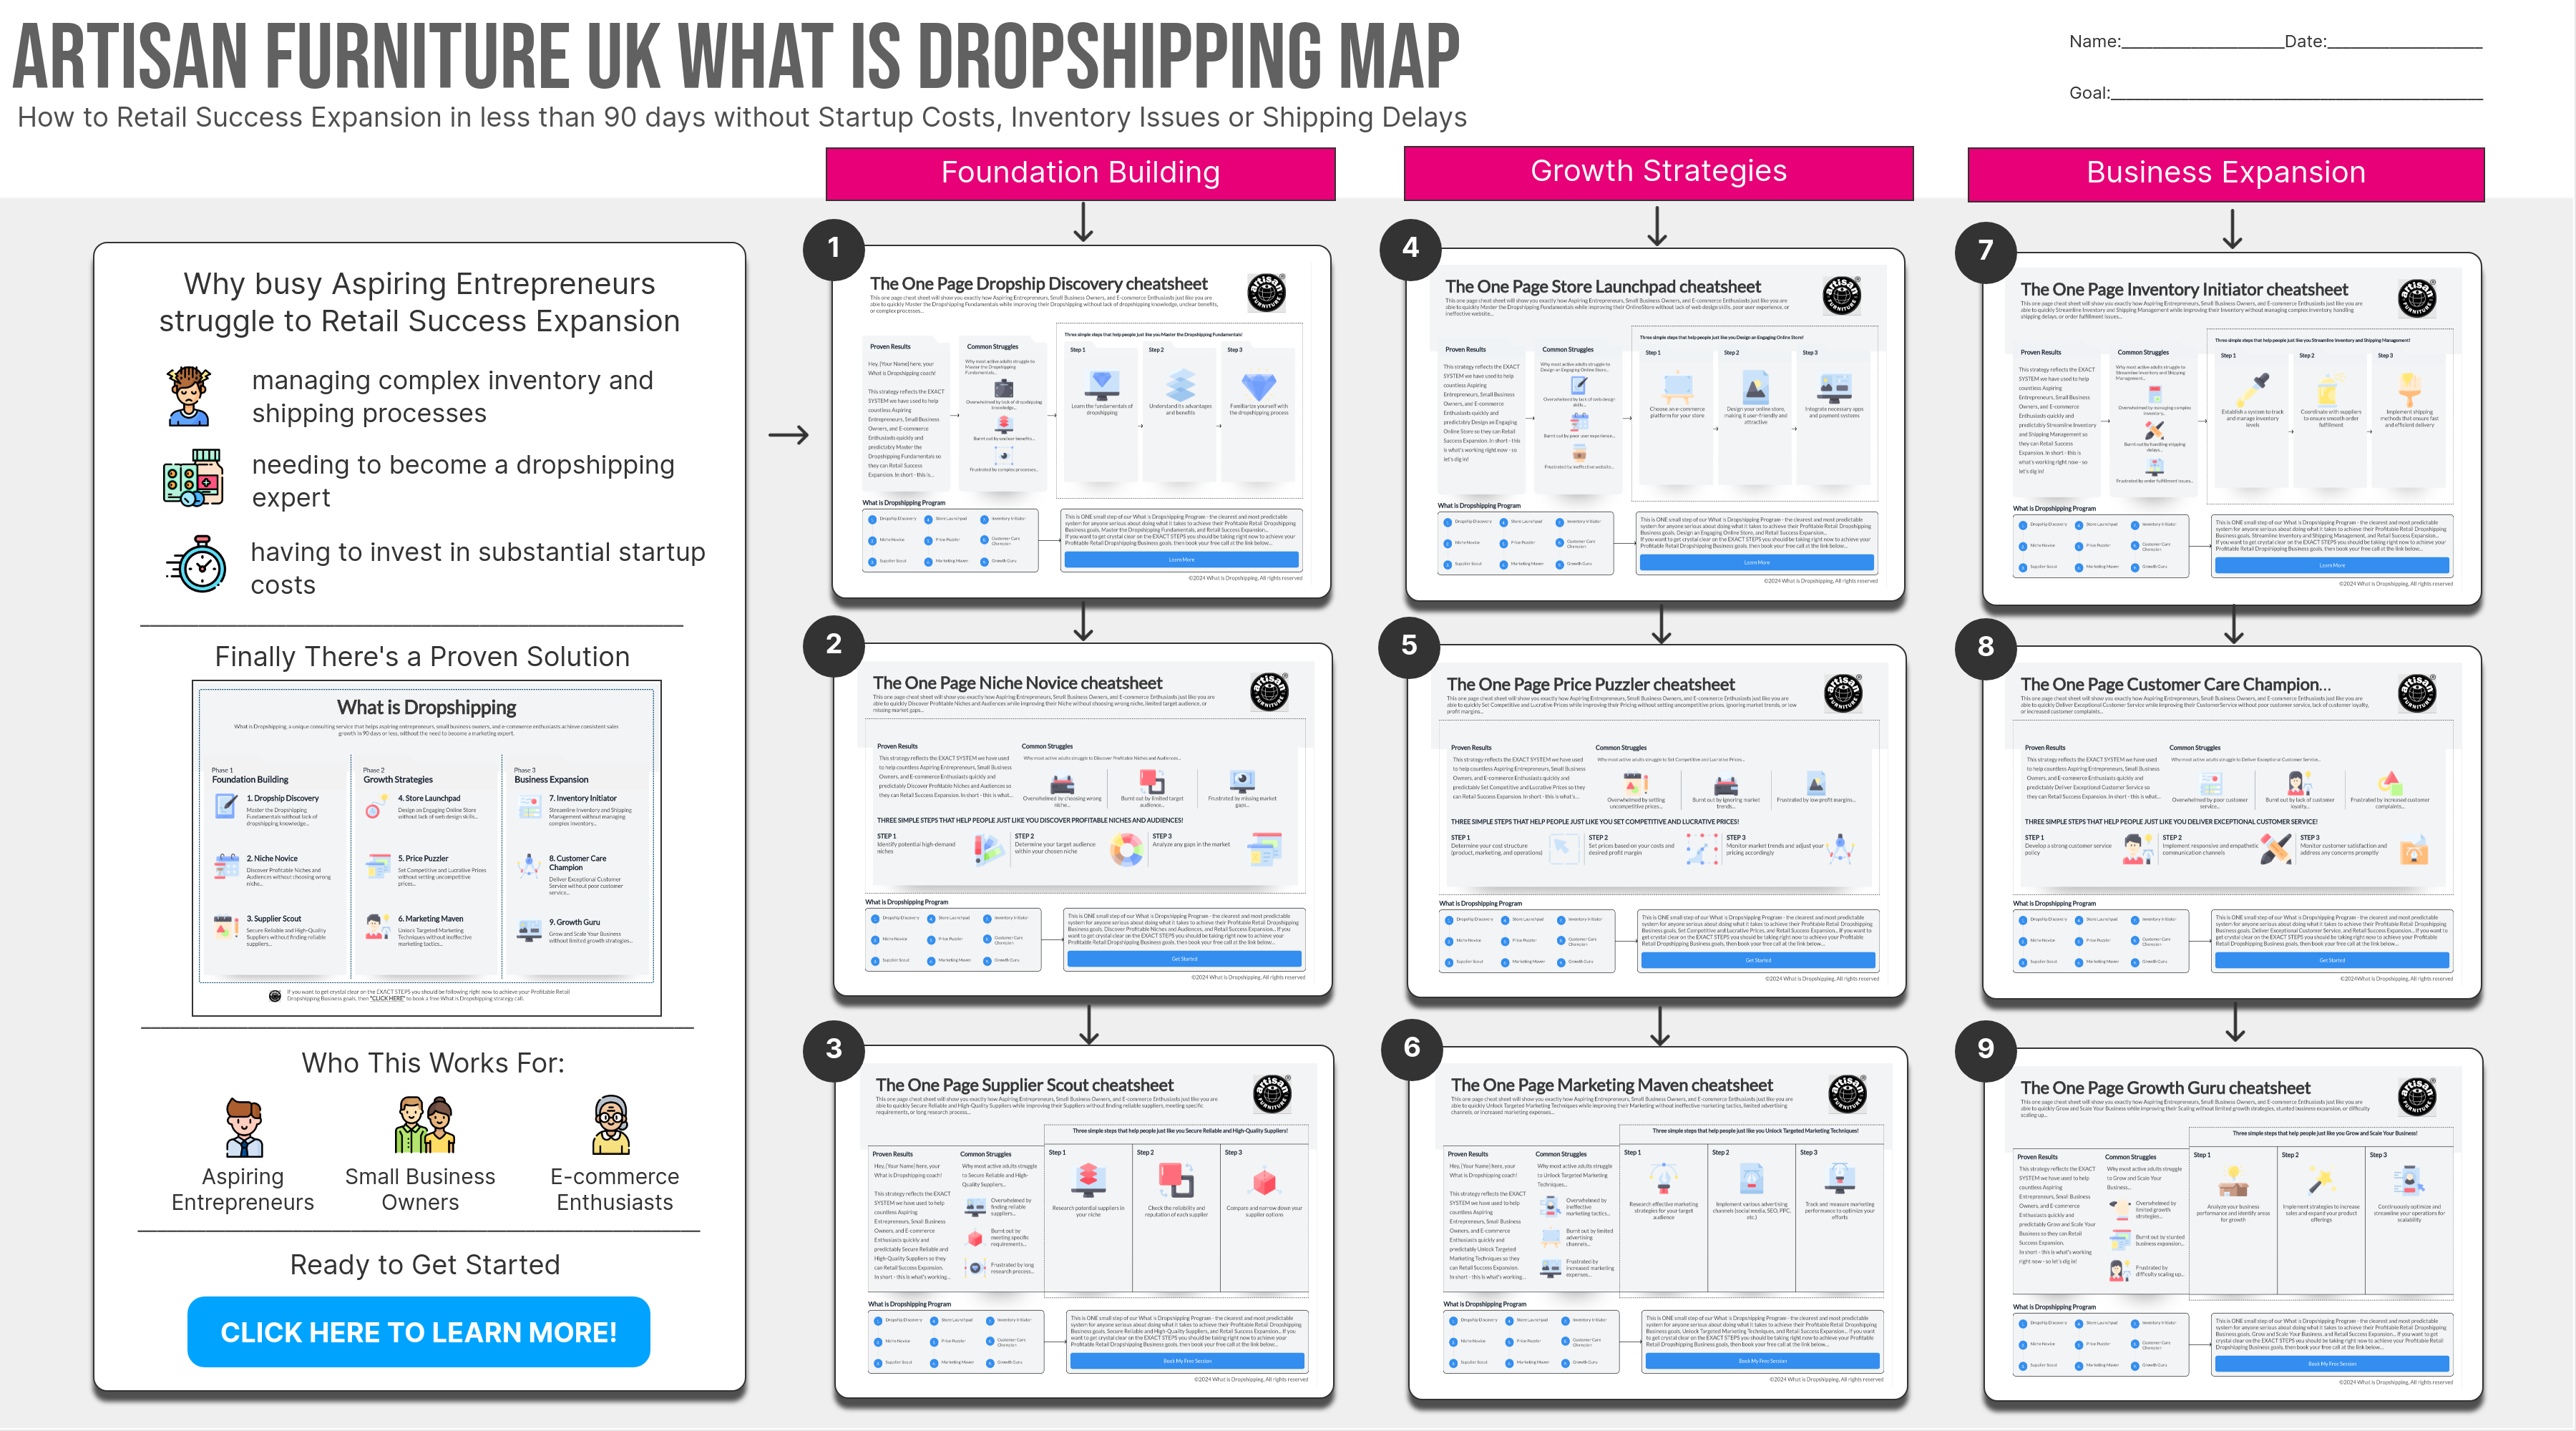 Infographic outlines Dropshipping business strategies and expansion.